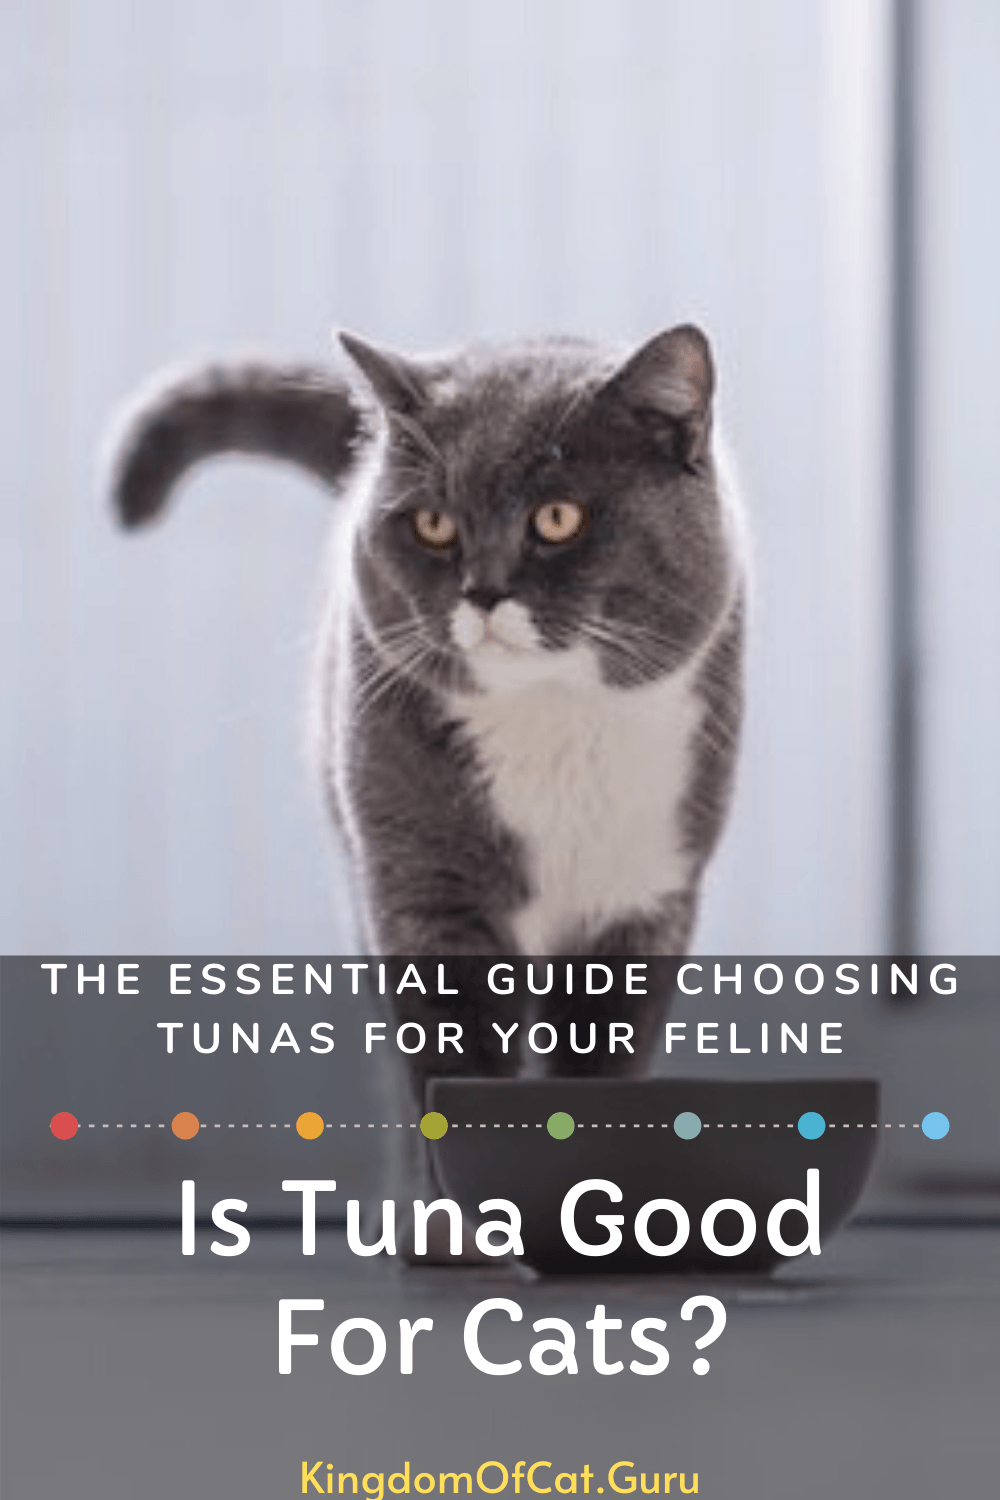 Is tuna good for cats?